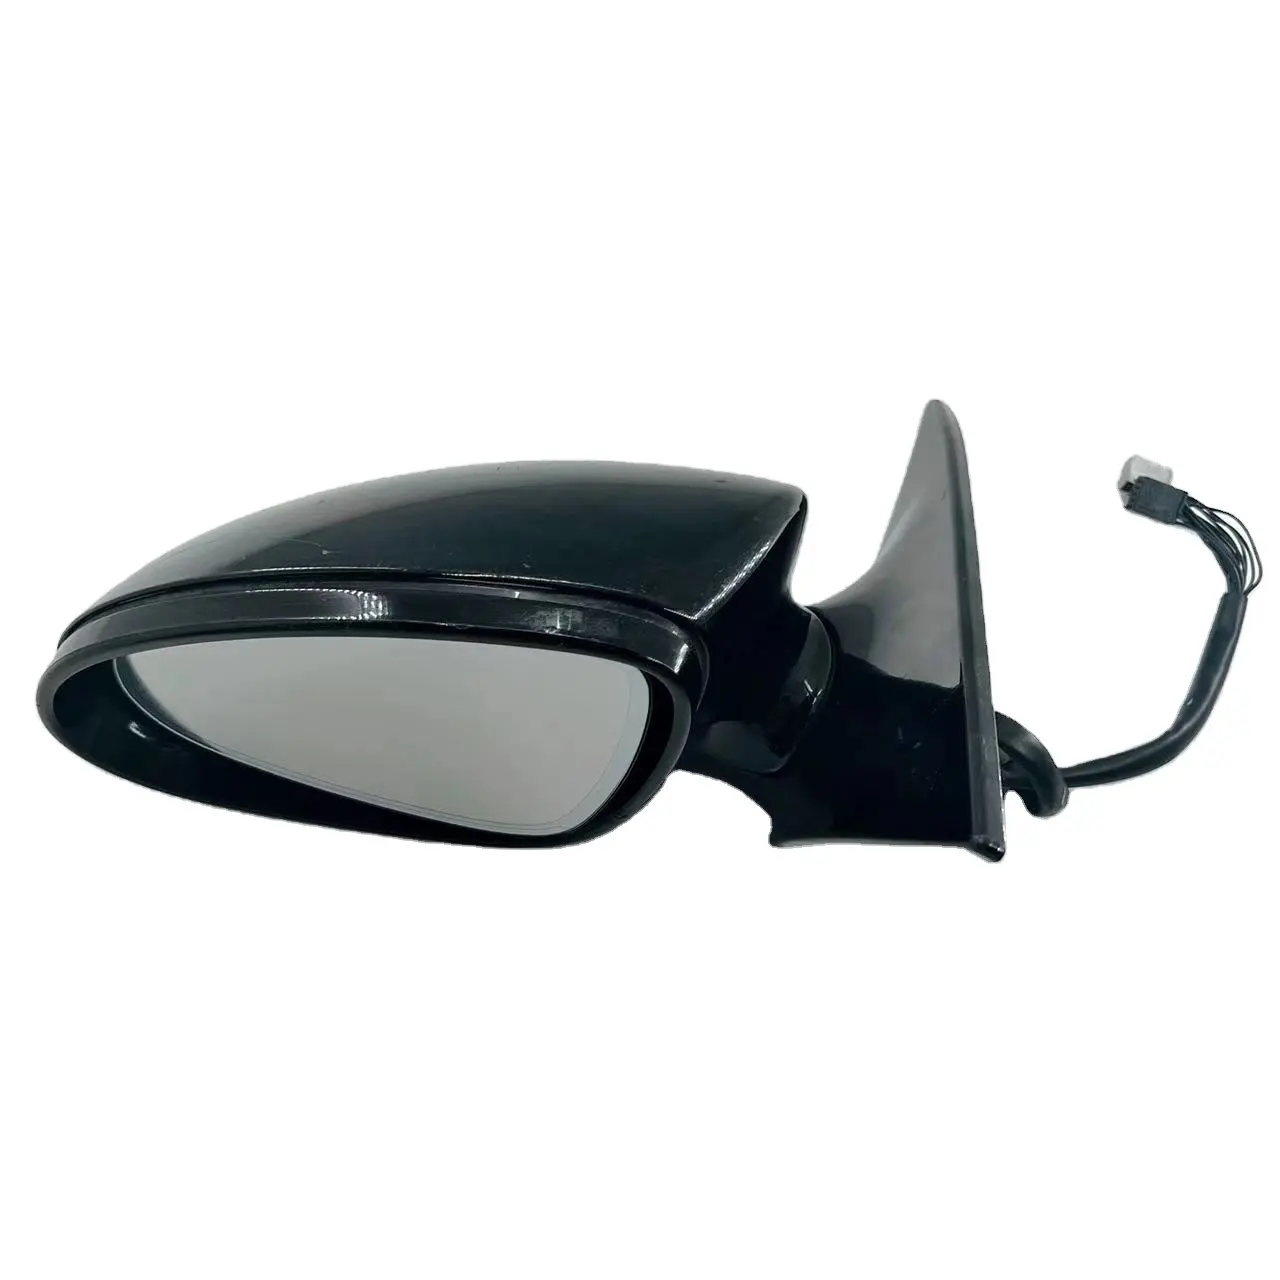 Full Real Car body kit Side Mirror Anti Glare Rearview Mirror Assembly For Mercedes Benz CLS W219